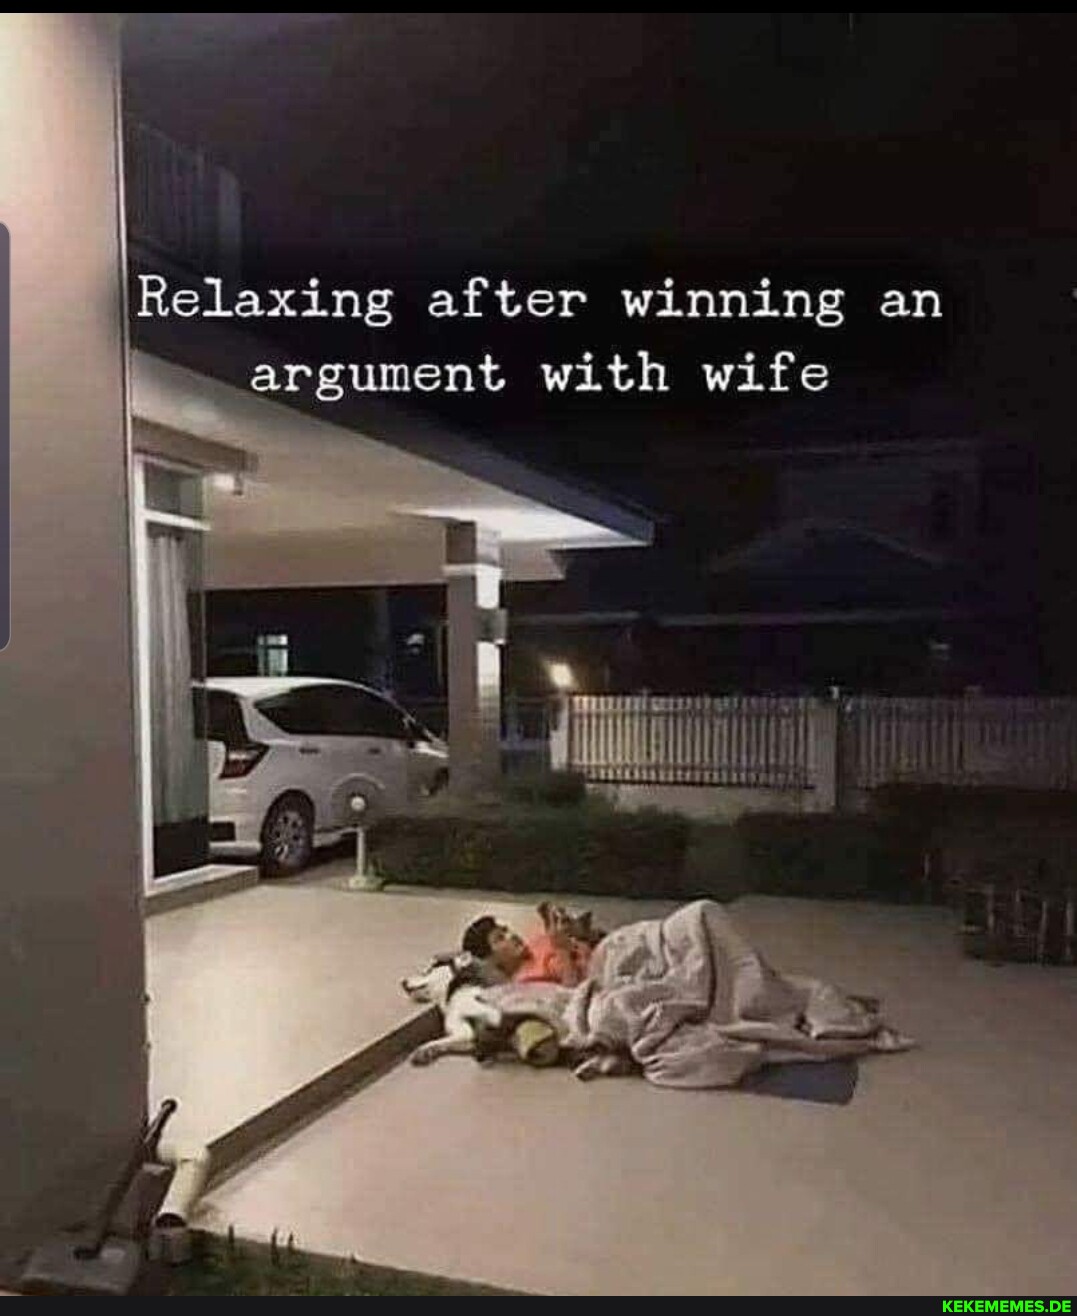 I Relaxing after winning an argument with wife